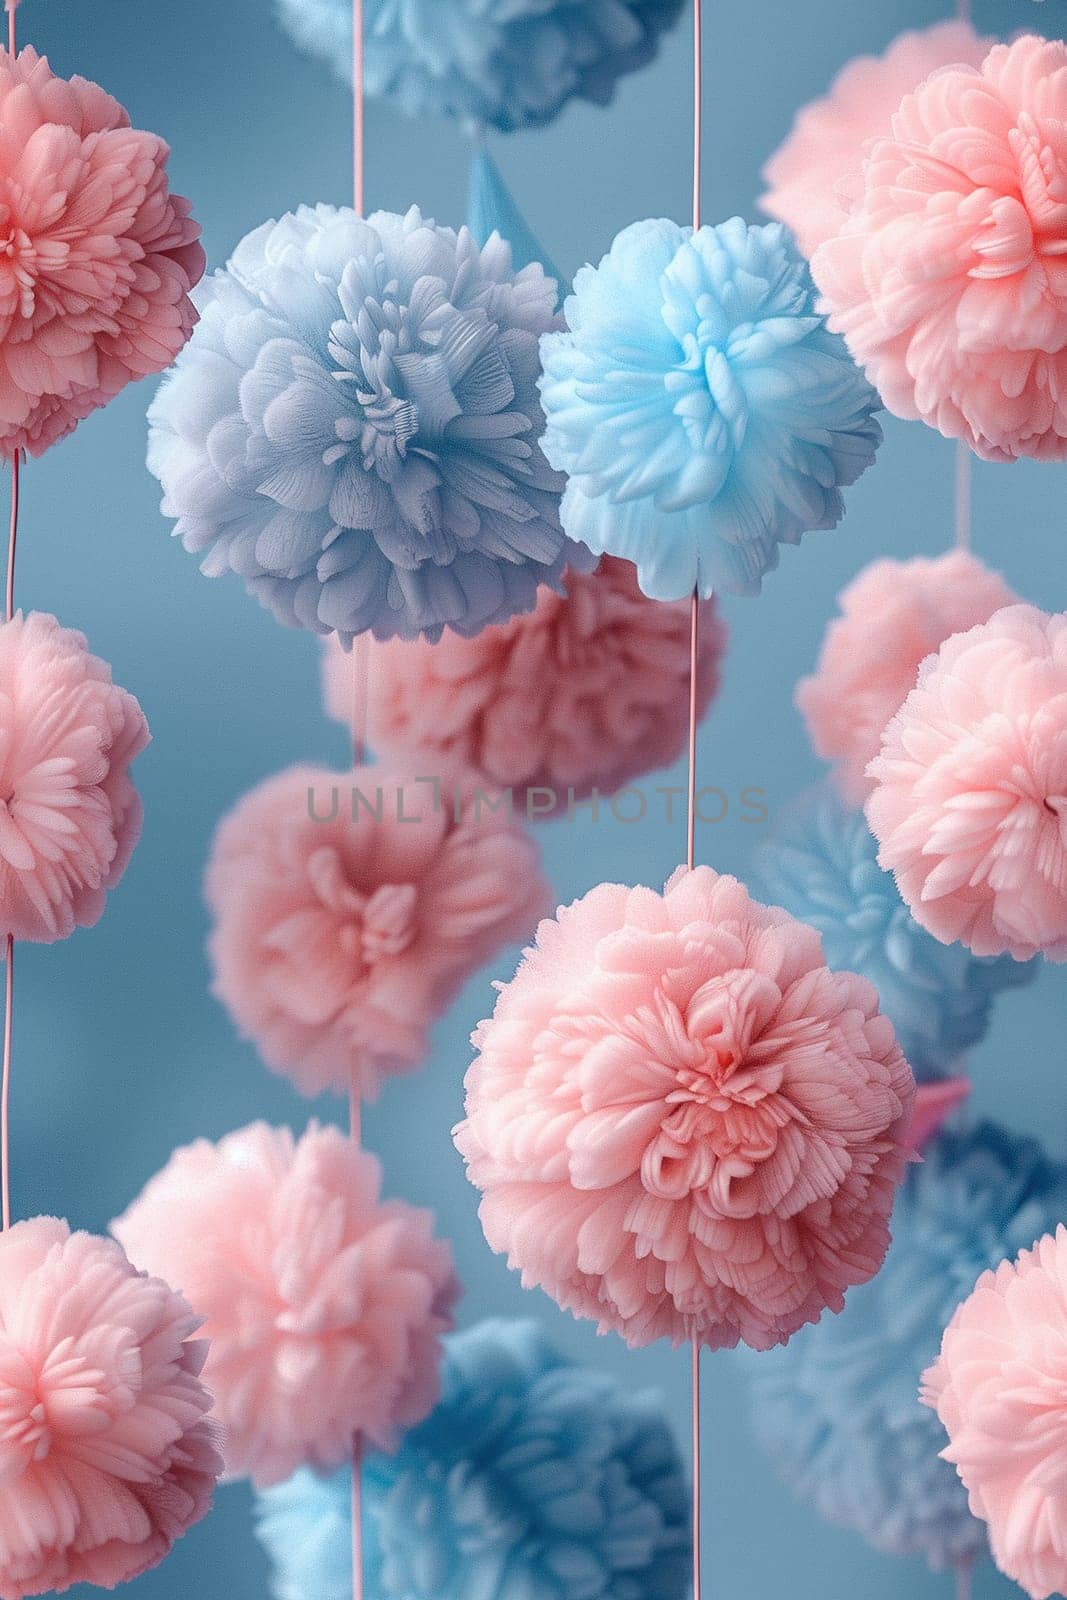 Vertical background with blue and pink fluffy balls.